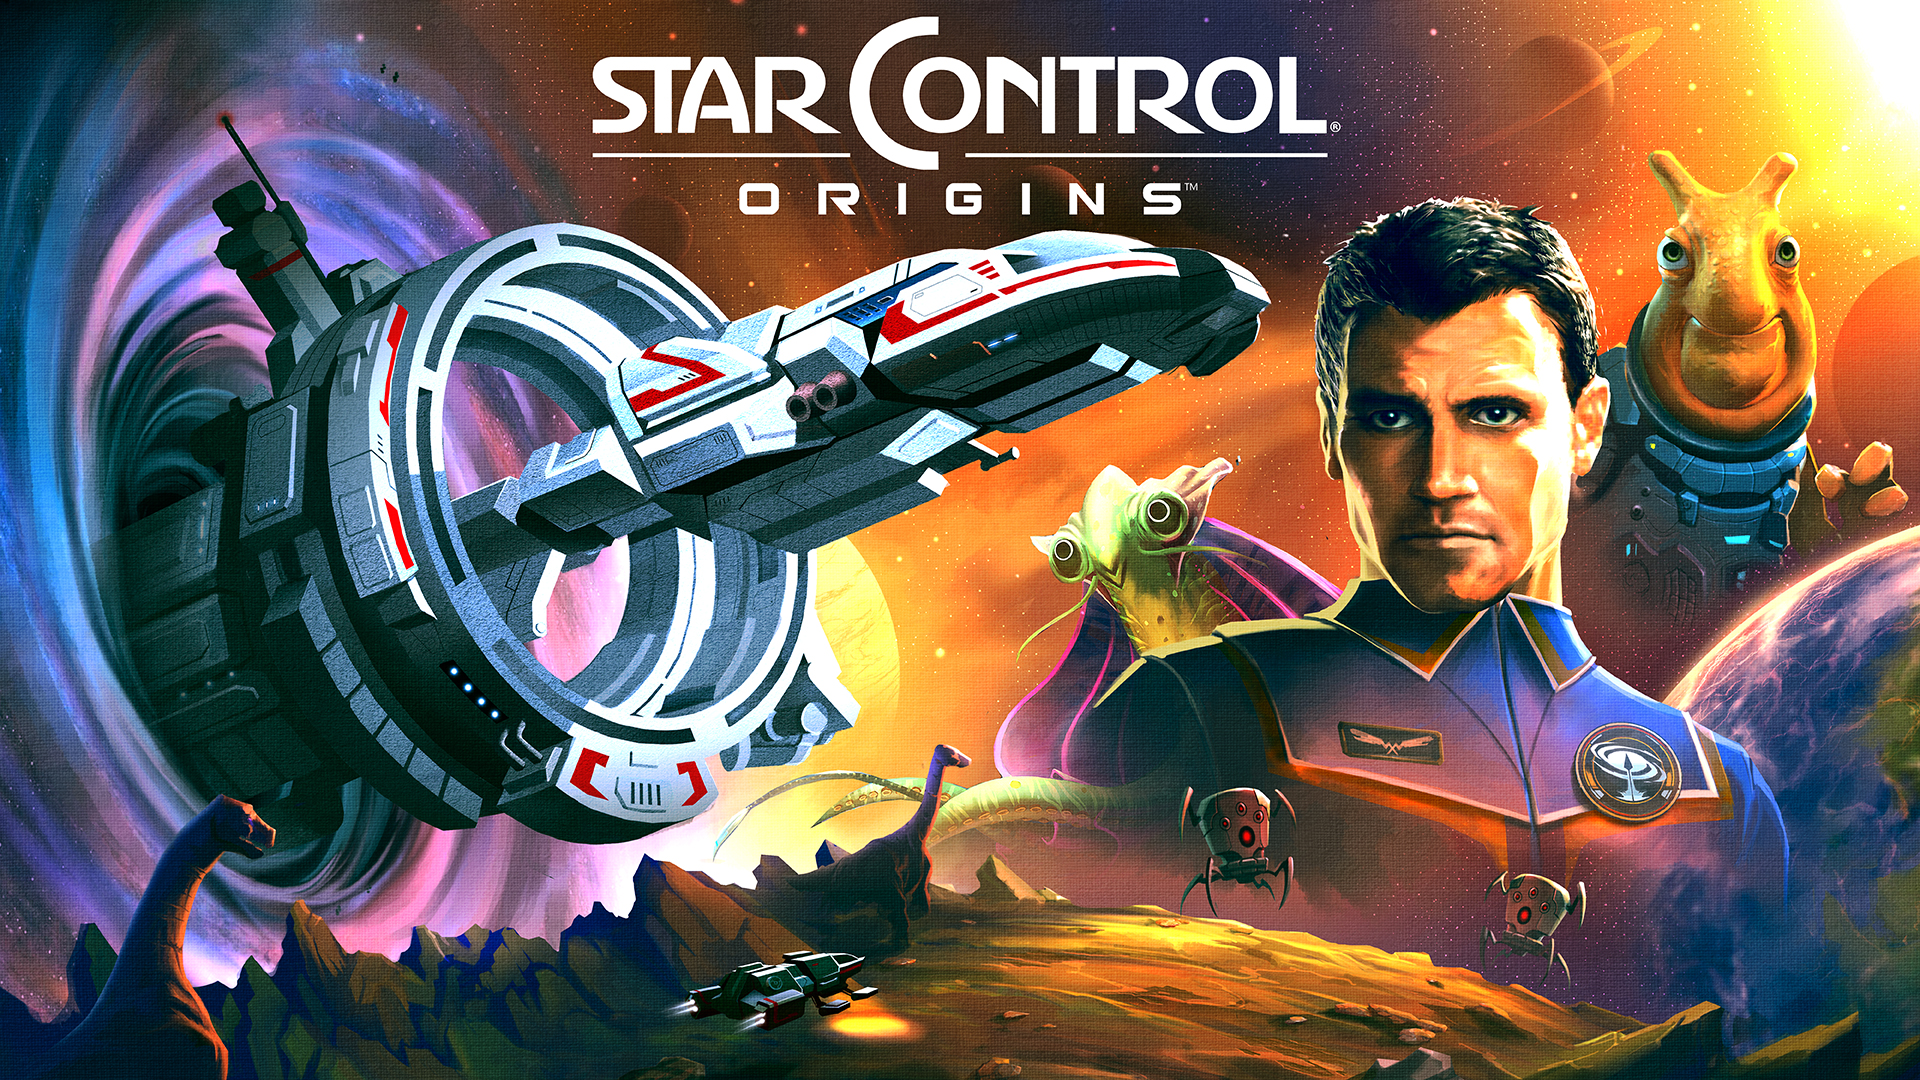 The Welcomed Return of Star Control